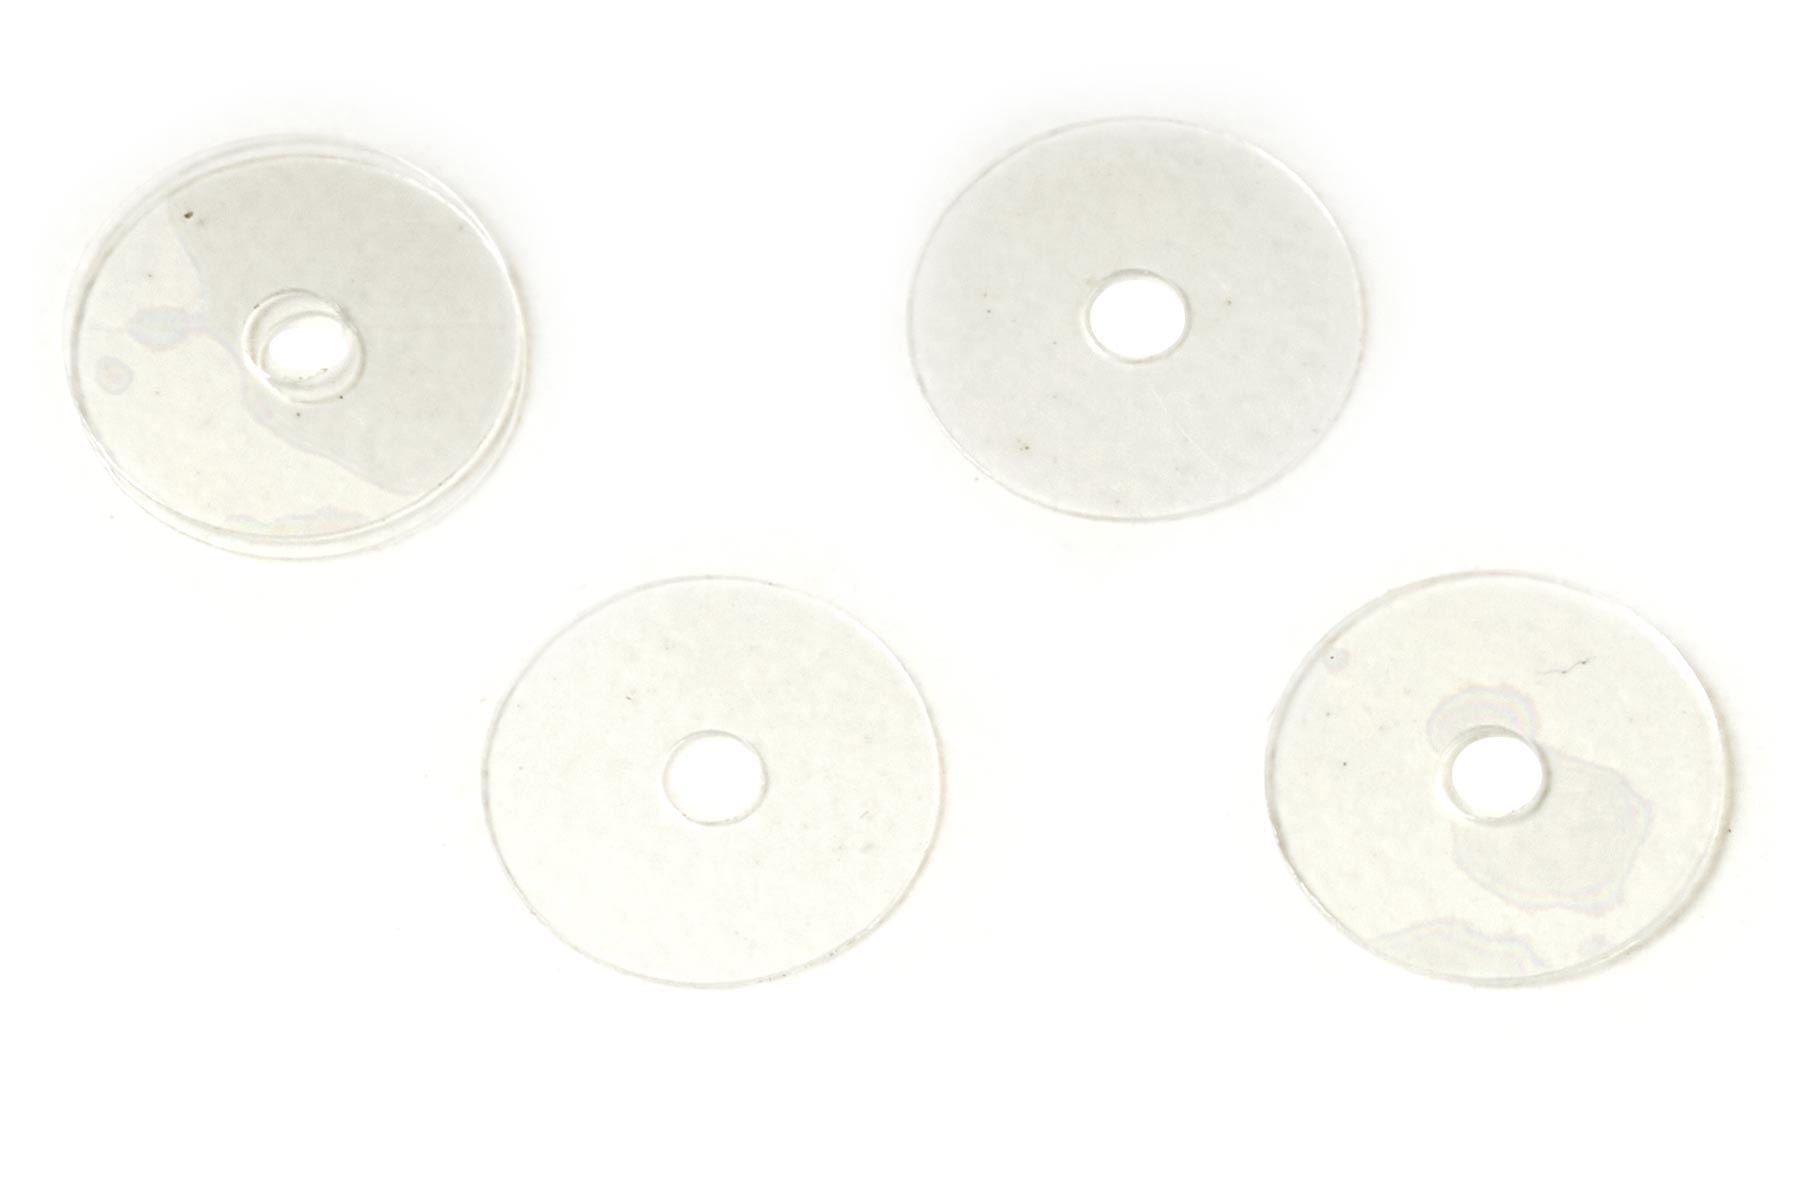 RotorScale 200 Size F180 Helicopter Main Blade Gasket (4) RSH1004-037